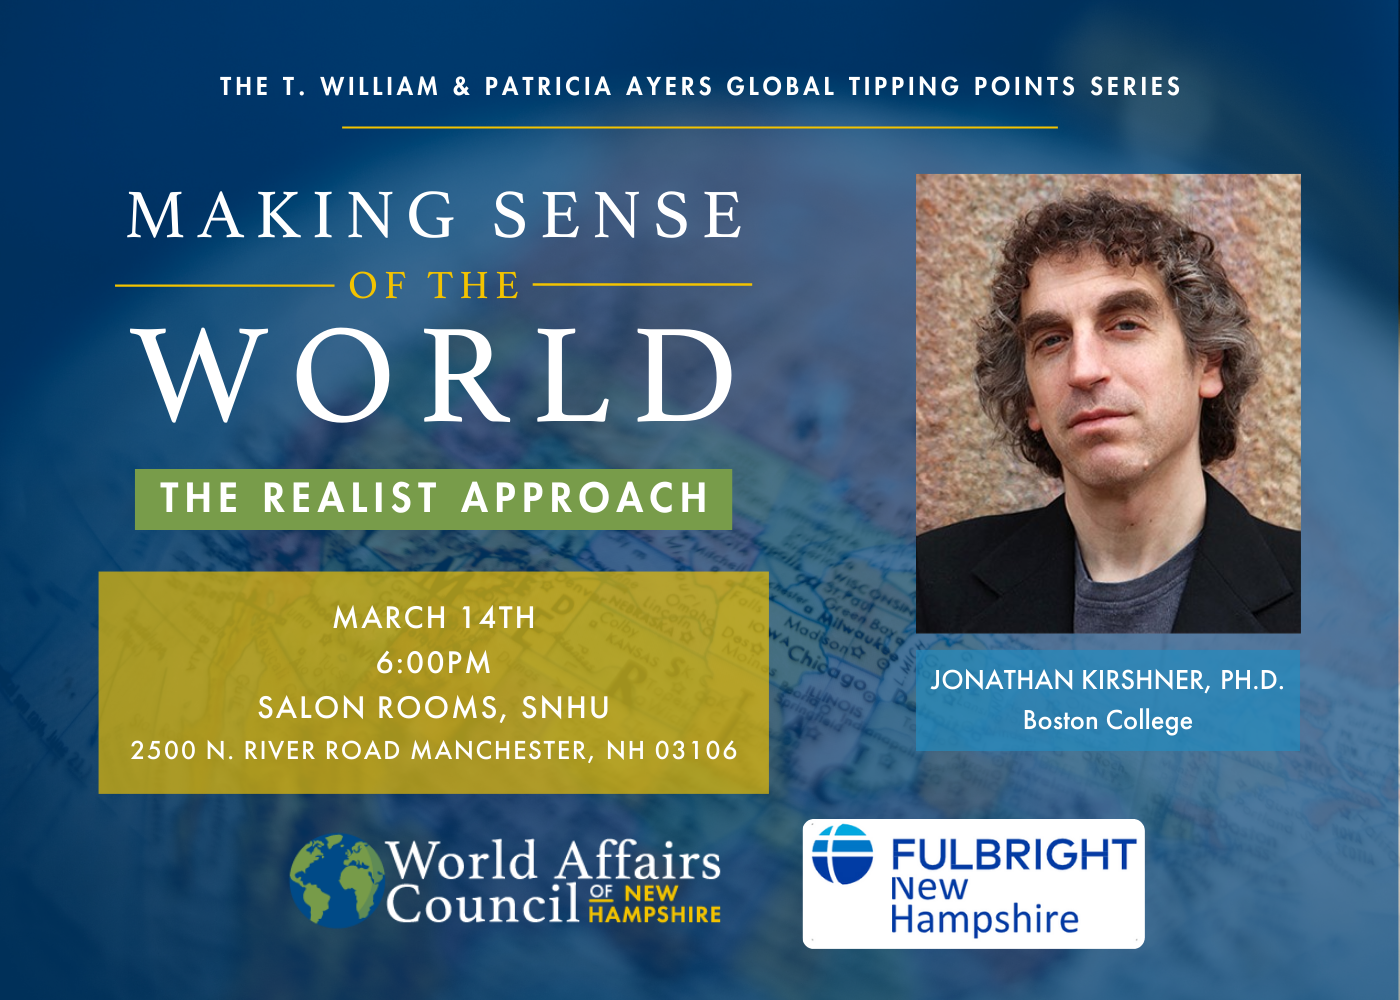 Making Sense of the World - The Realist Approach